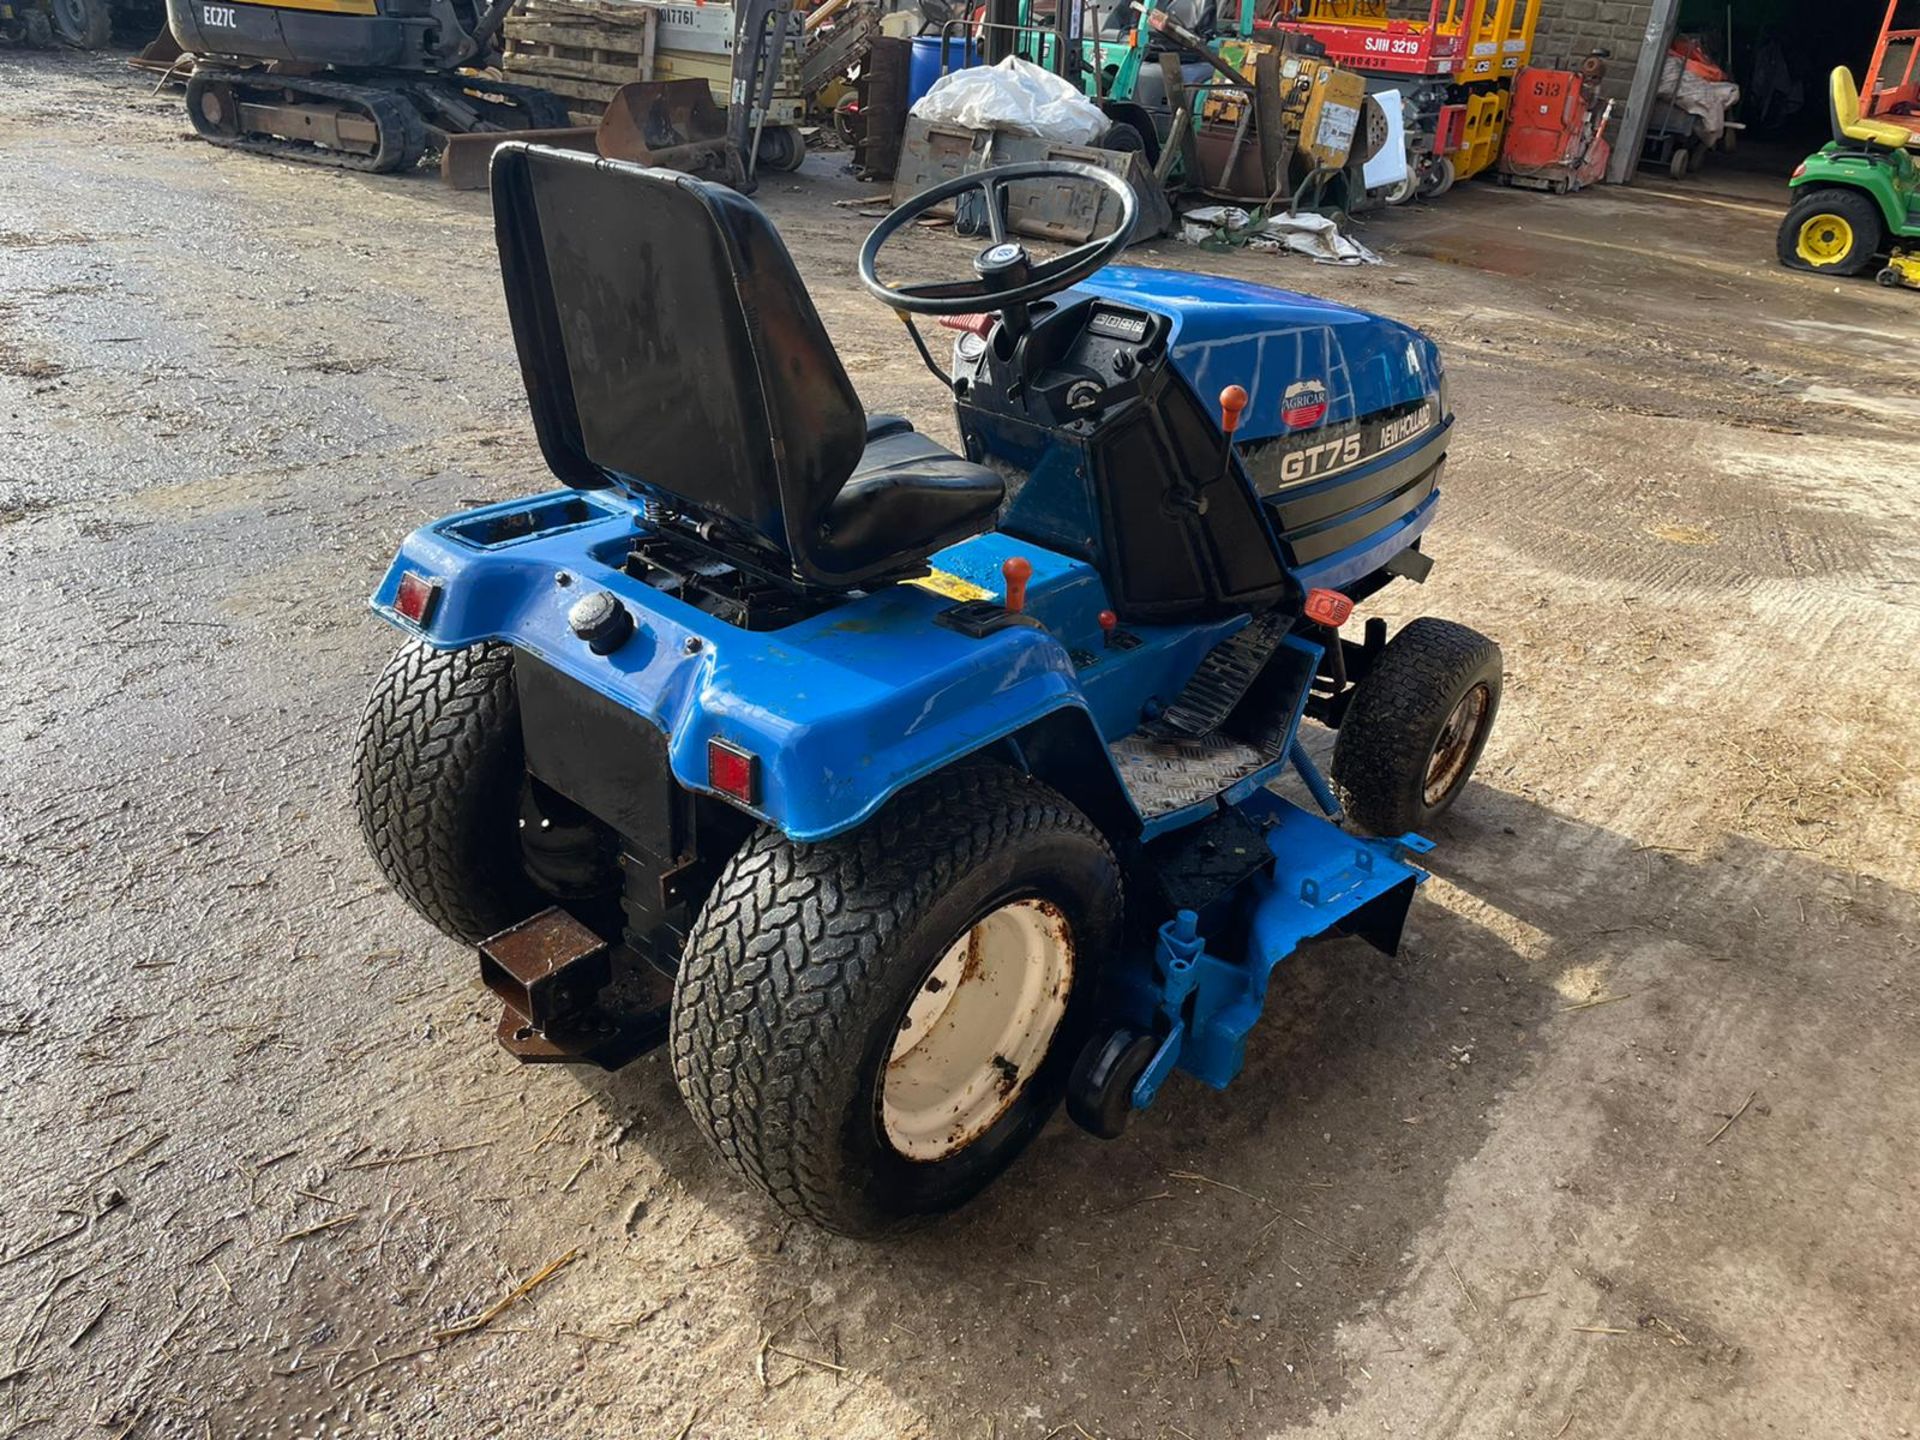 NEW HOLLAND GT75 RIDE ON MOWER, RUNS, DRIVES AND CUTS, 3 CYLINDER SHIBAURA DIESEL ENGINE *NO VAT* - Image 3 of 5